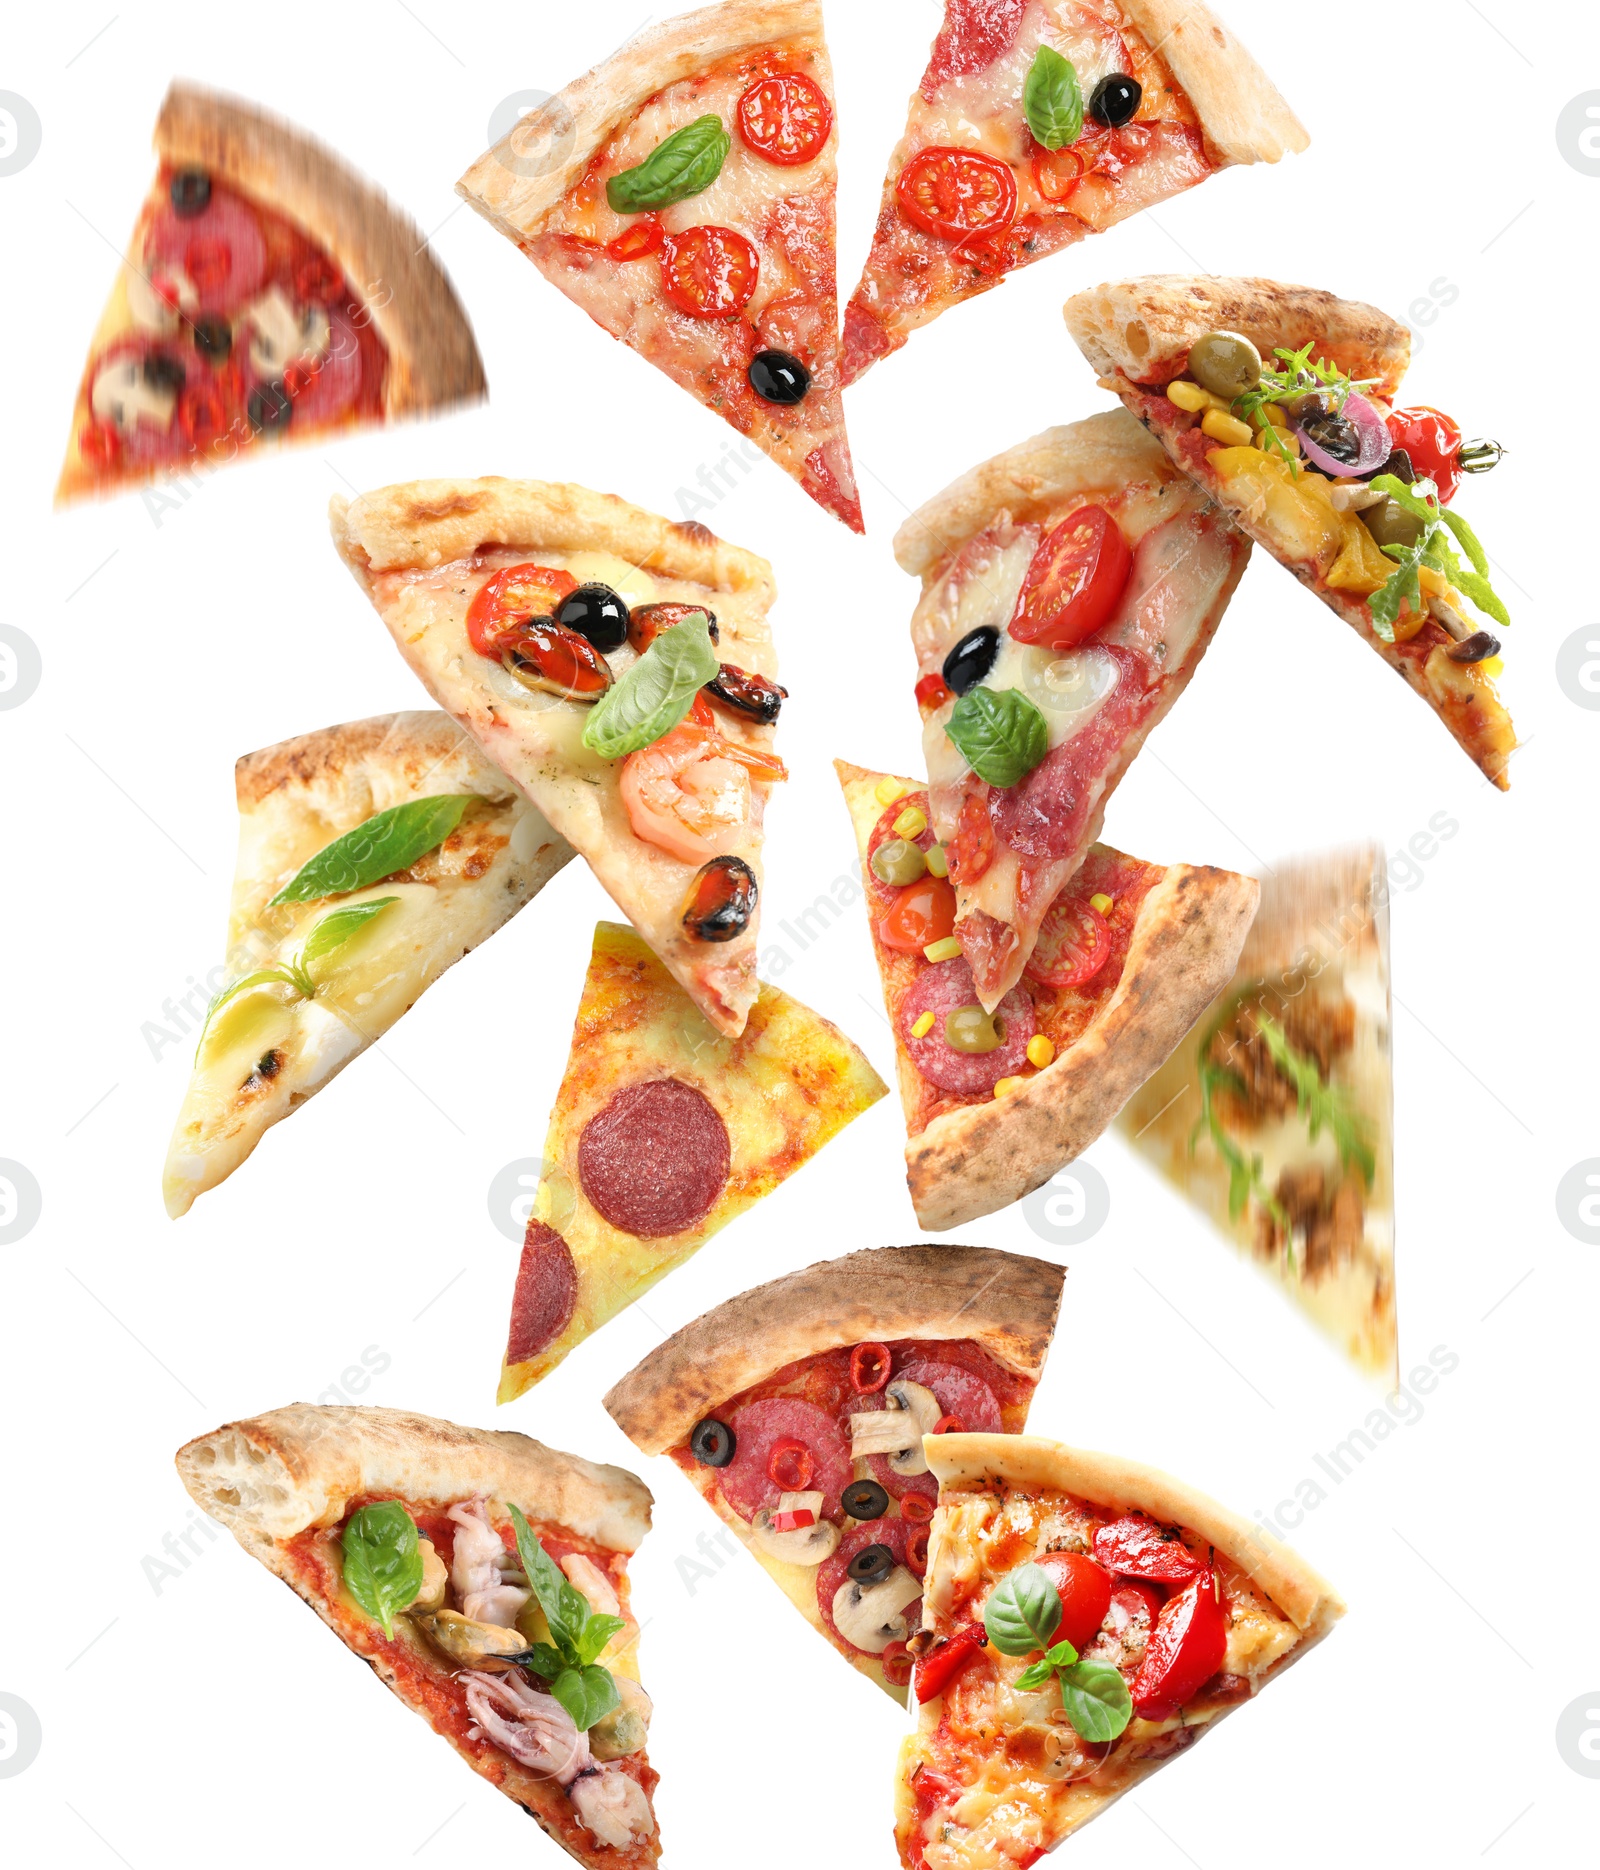 Image of Flying slices of different pizzas on white background